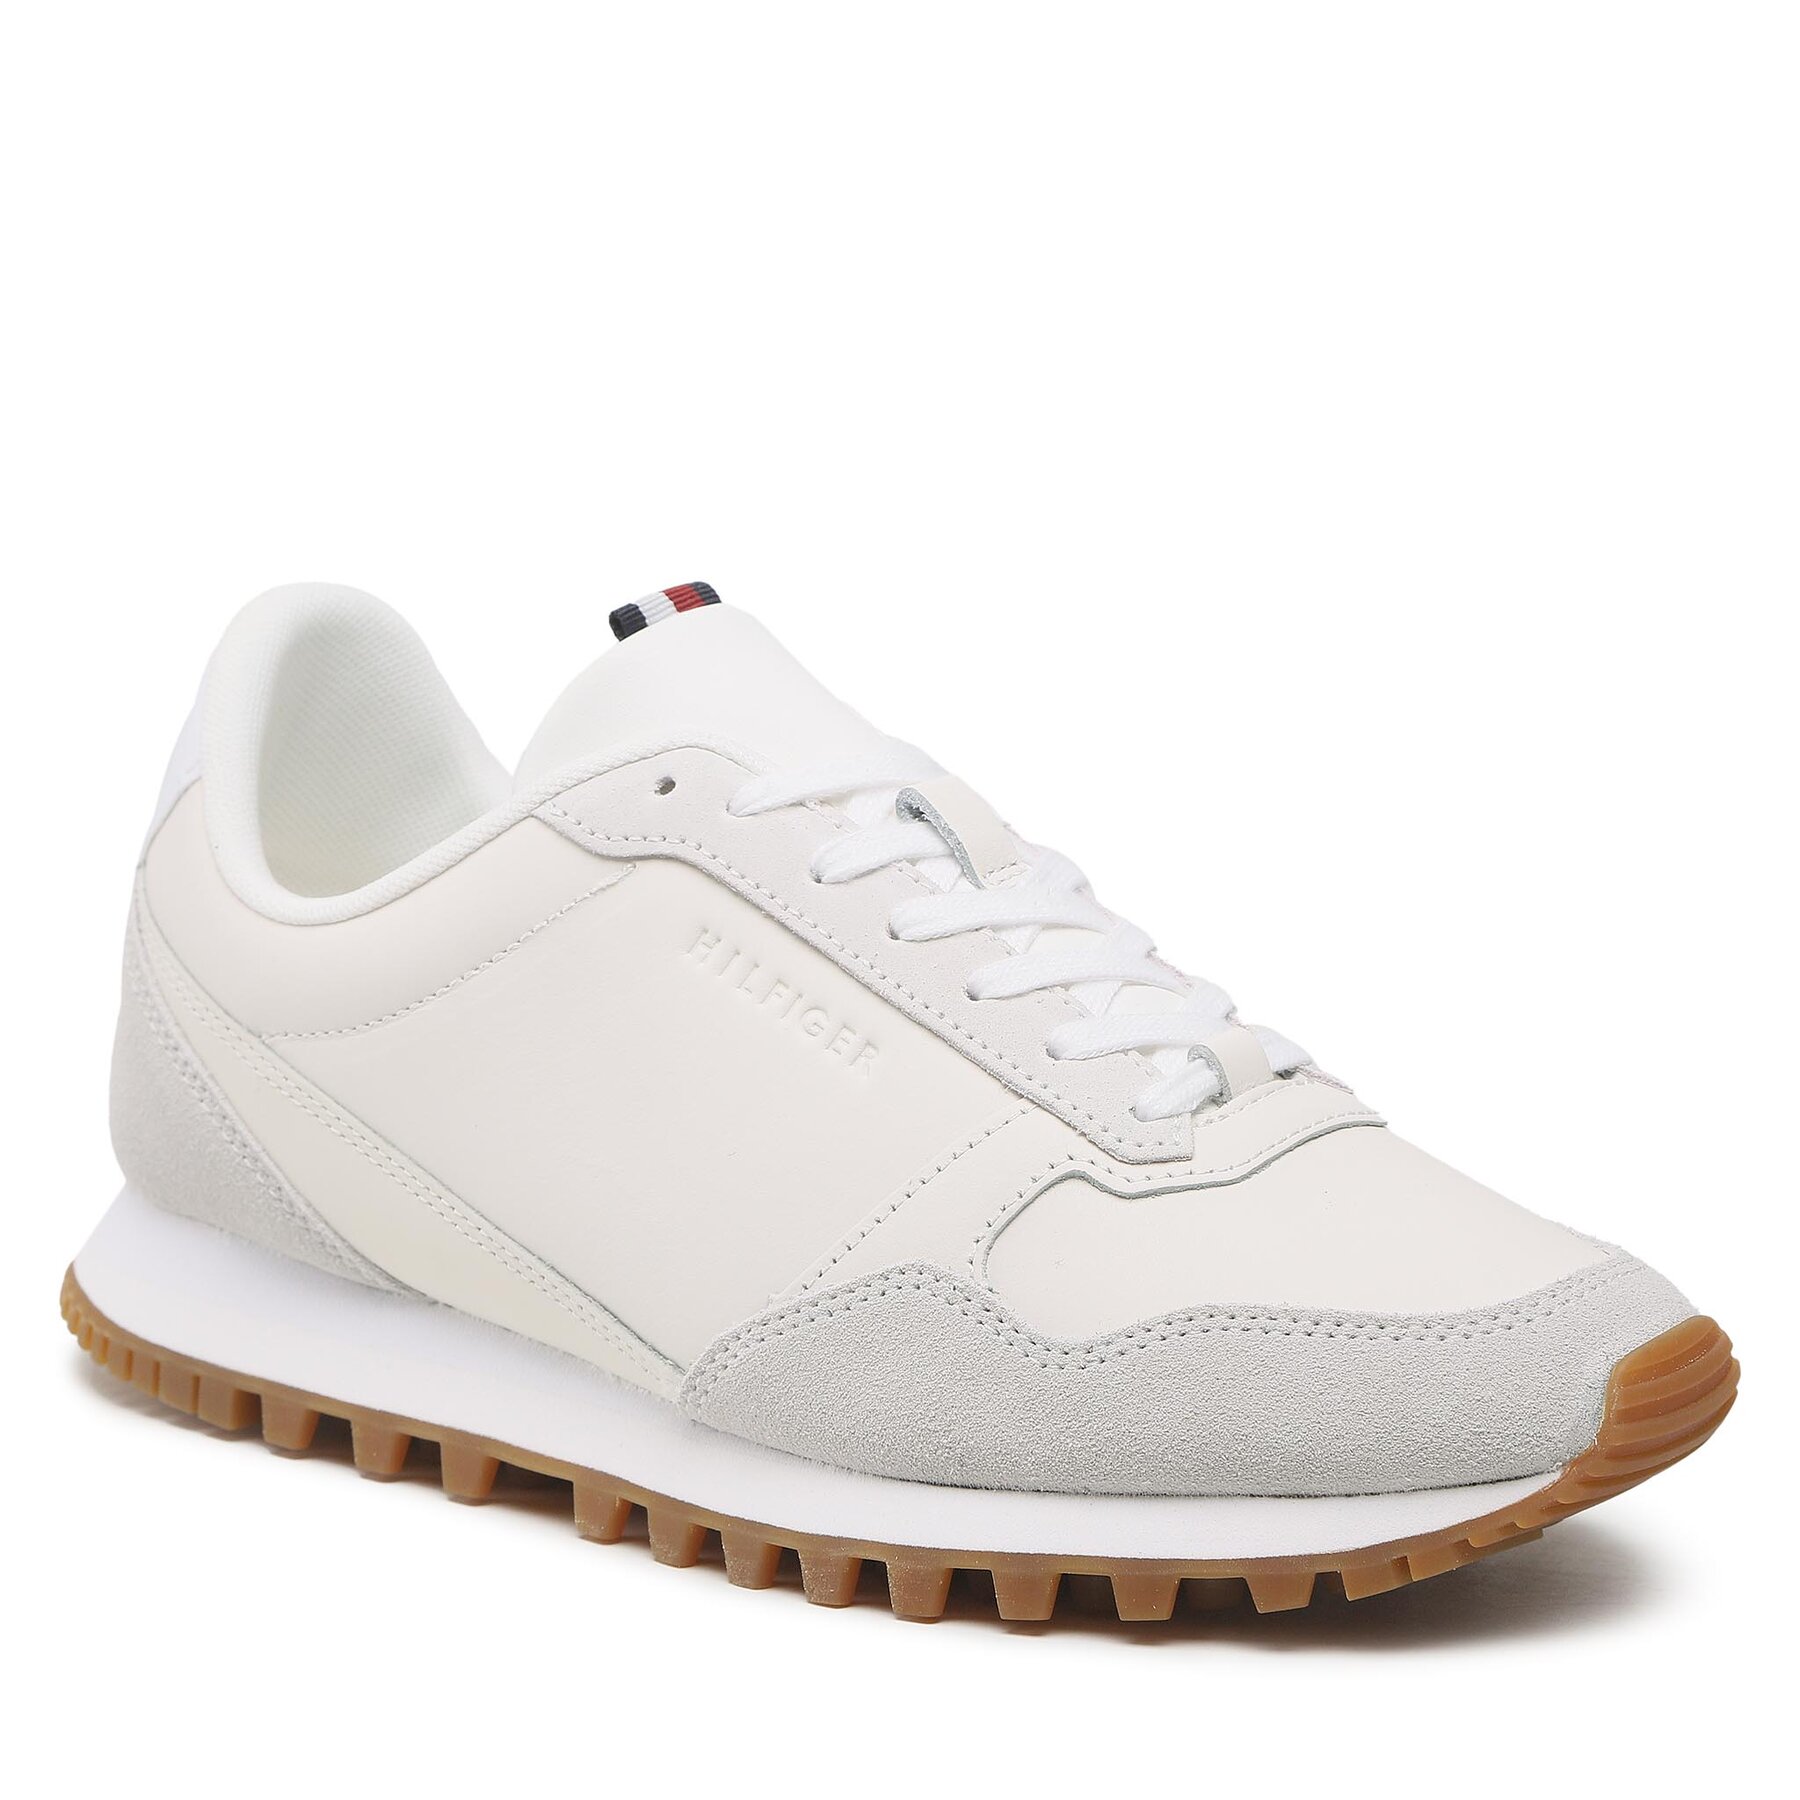 Sneakers Tommy Hilfiger Elevated Runner Leather Mix FM0FM04357 Light Cast PSU Cast imagine 2022 reducere